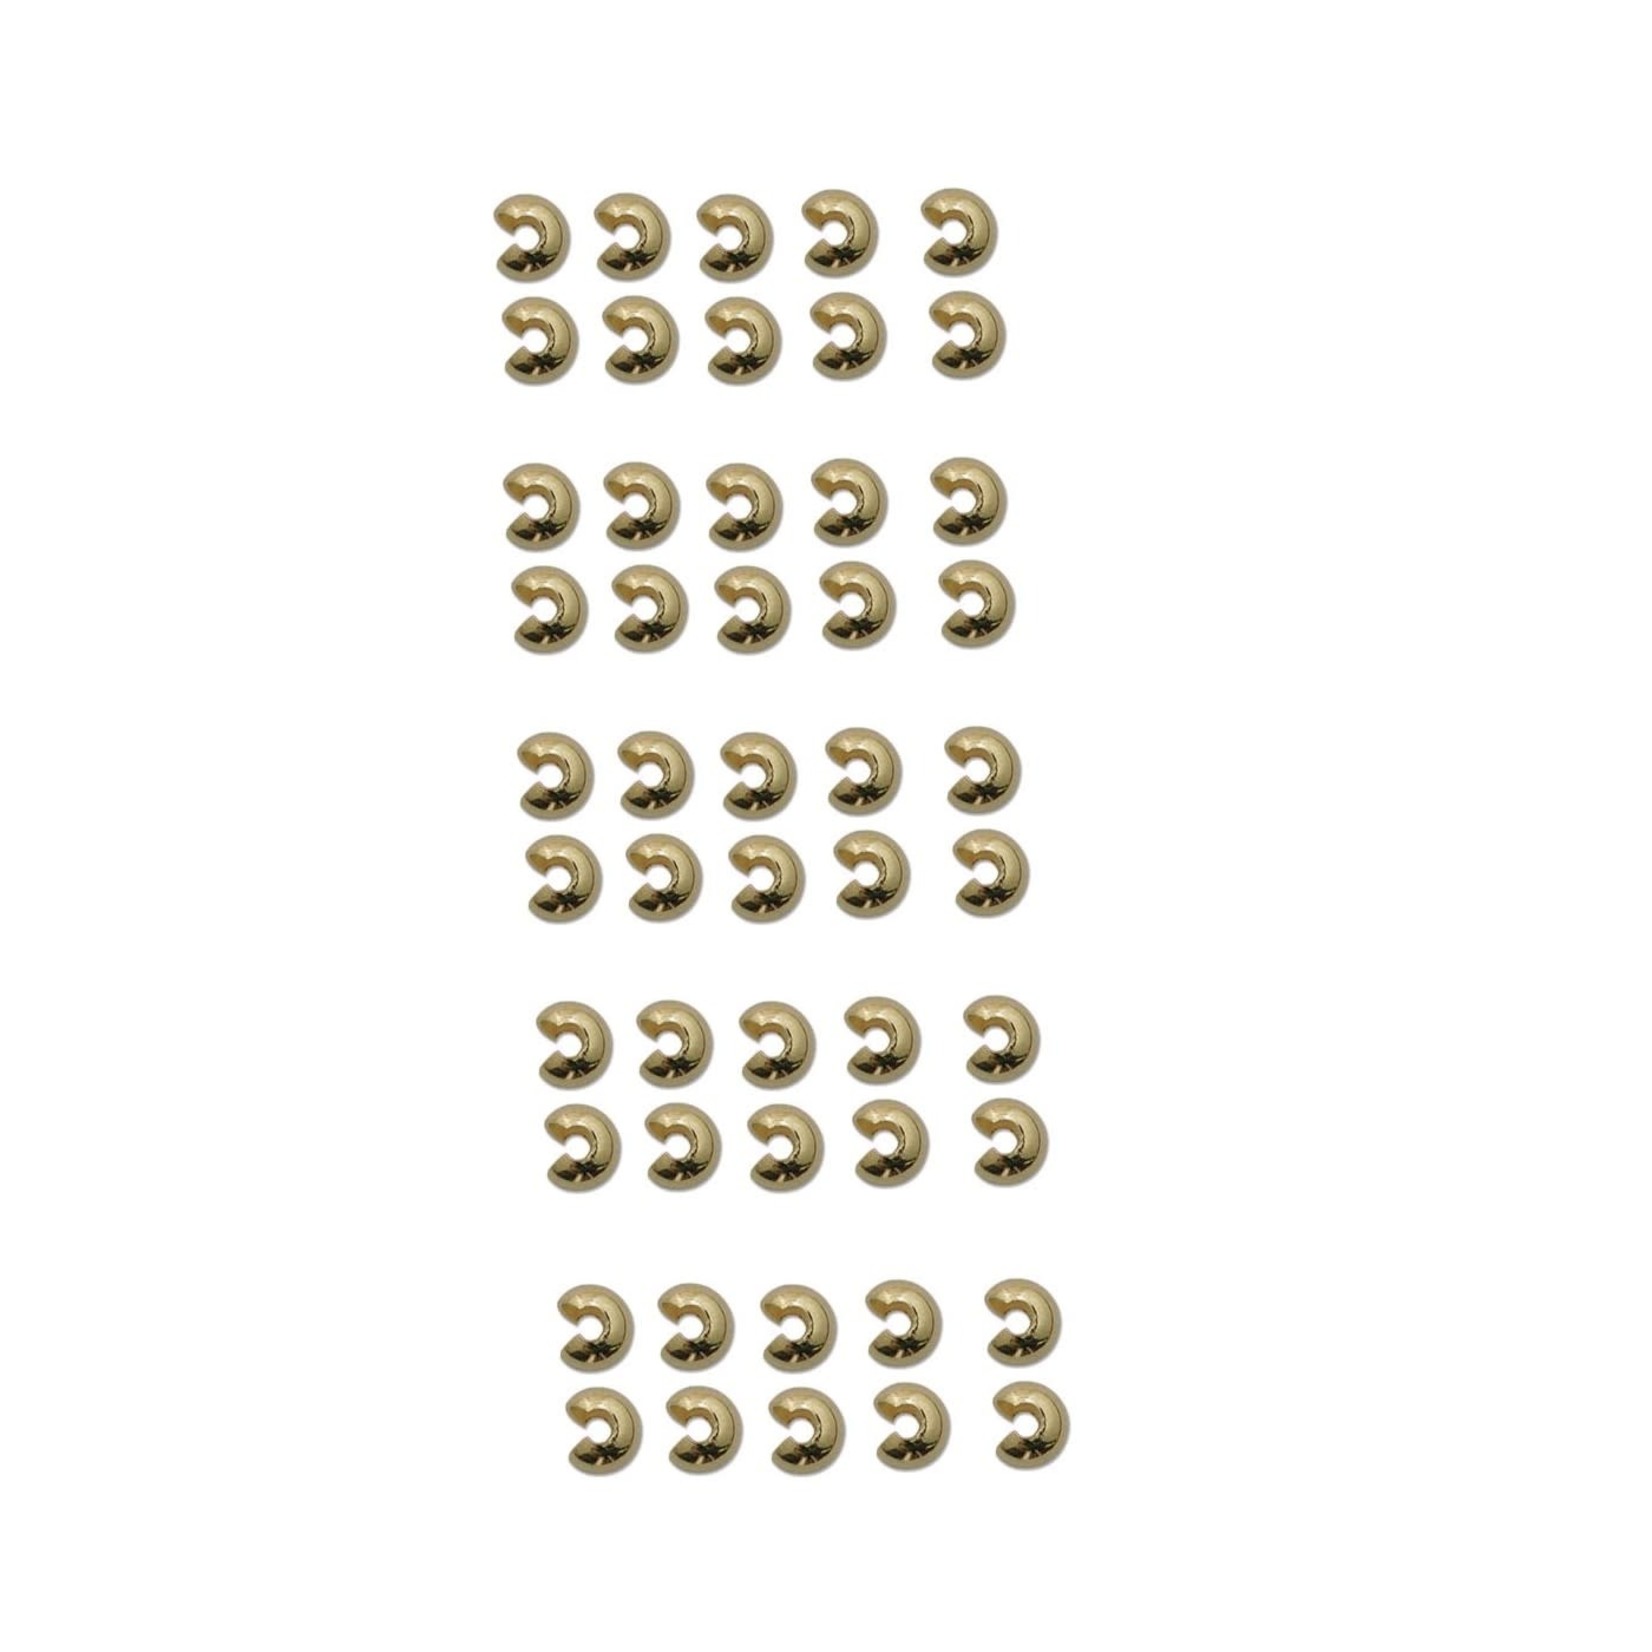 Gold Plated 5mm Crimp Cover - 50 pieces